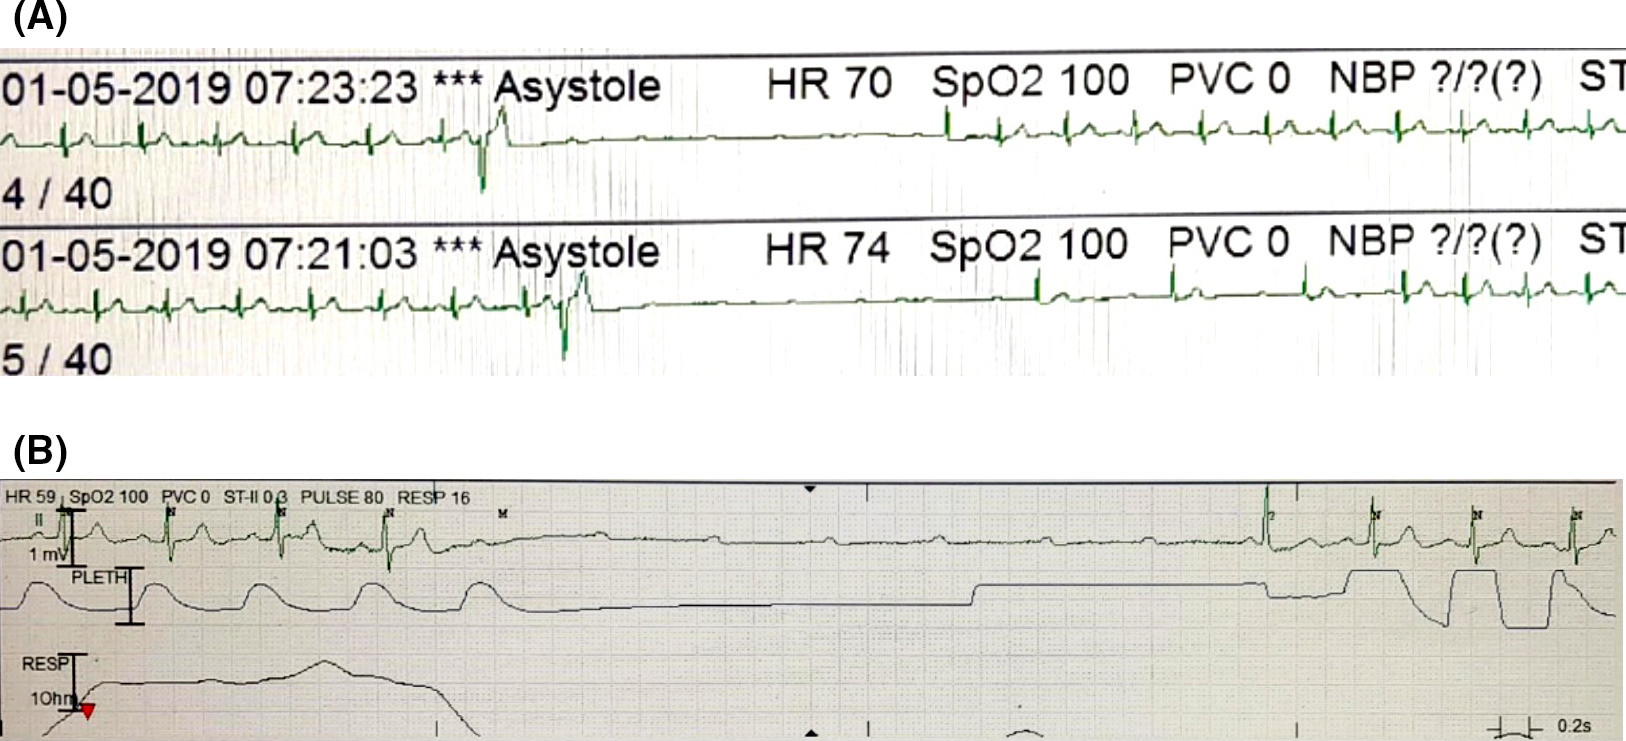 File:Single‐channel ECG recordings from ICU monitor. A, shows paroxysmal Phase 4 block triggered by a PVC. B, shows idiopathic paroxysmal AV block occurring without any obvious trigger.jpg